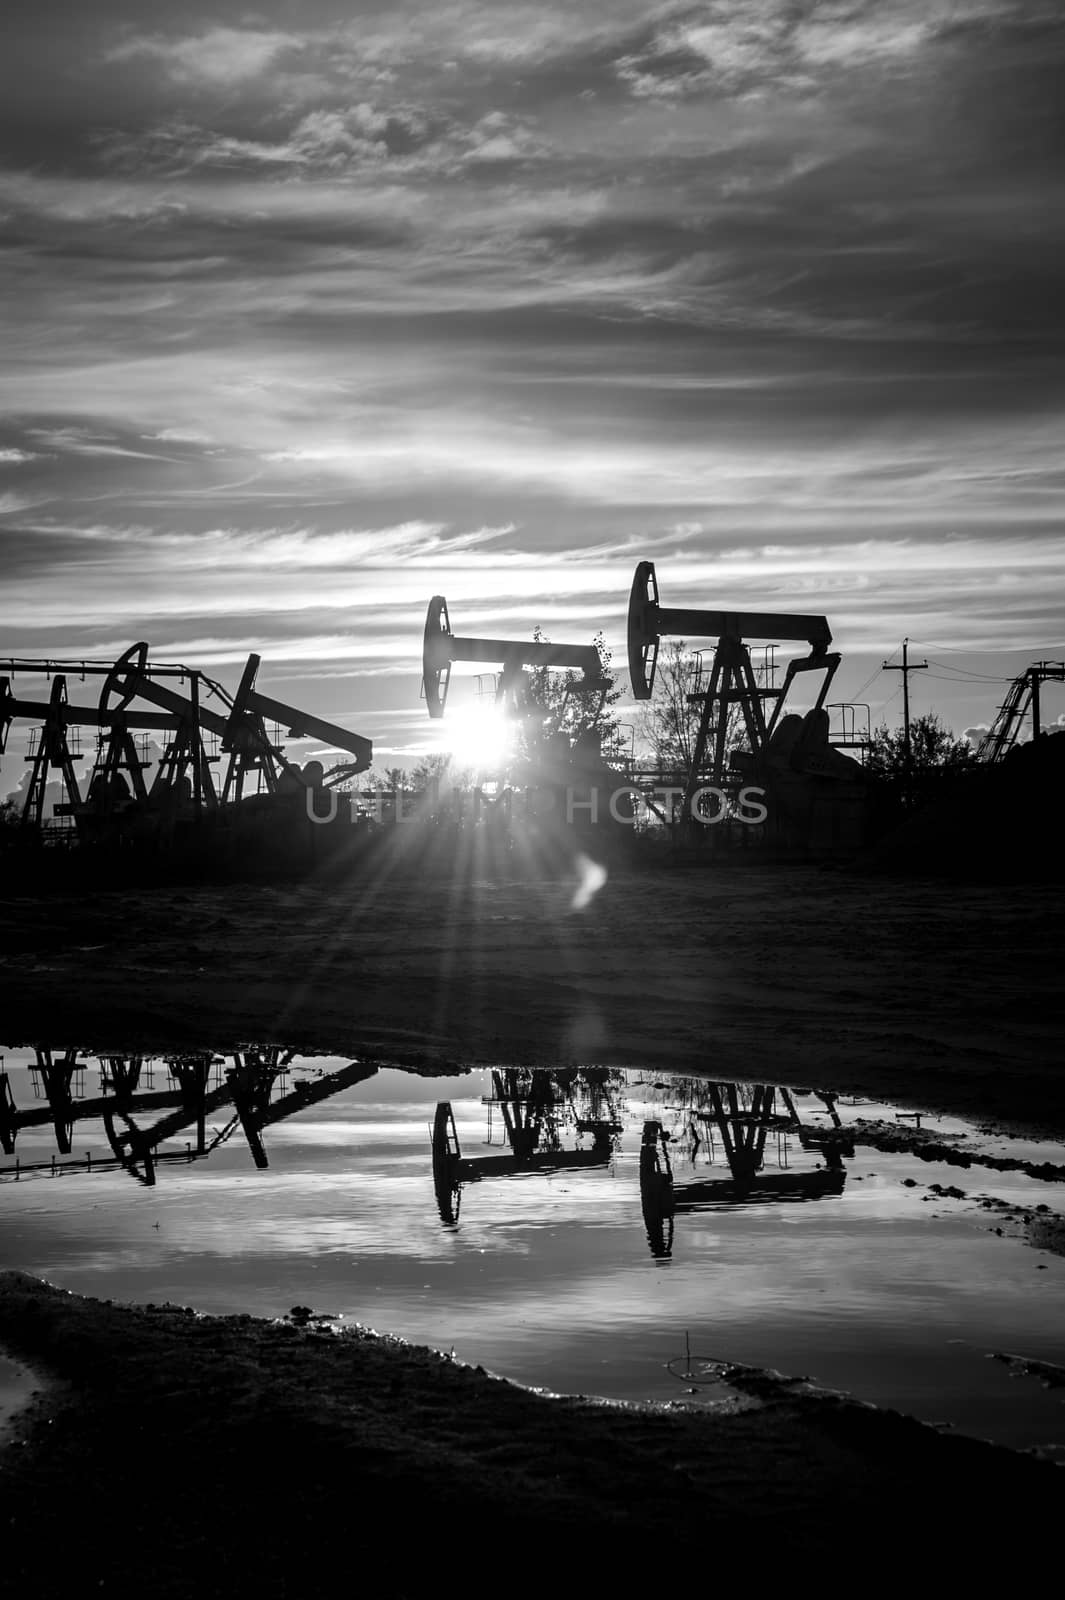 Oil pump jacks at sunset sky background. Black and white.